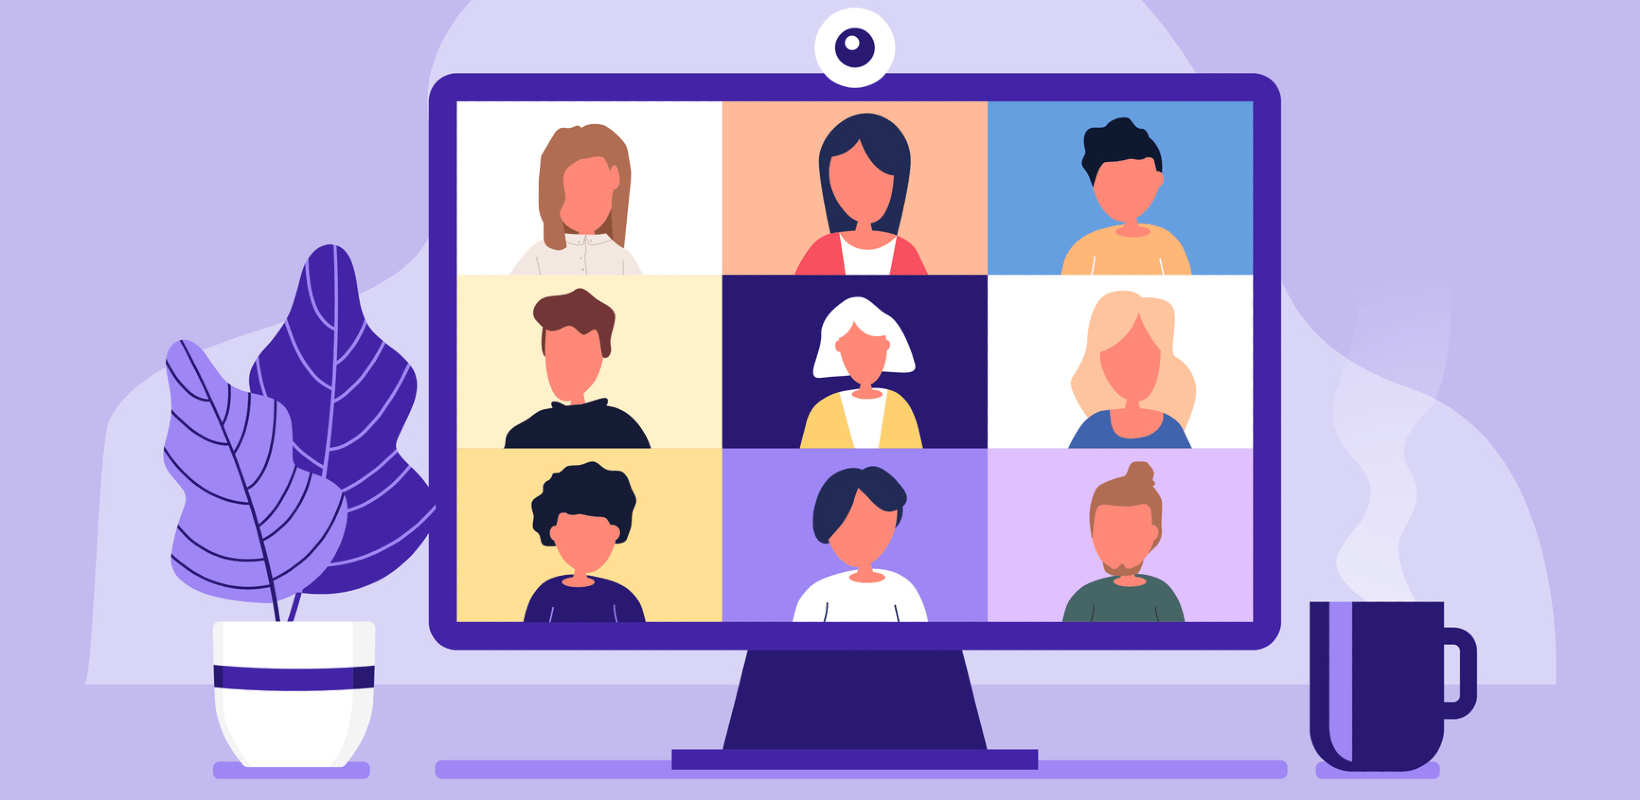 Nine people on a video screen in classic video chat grid format